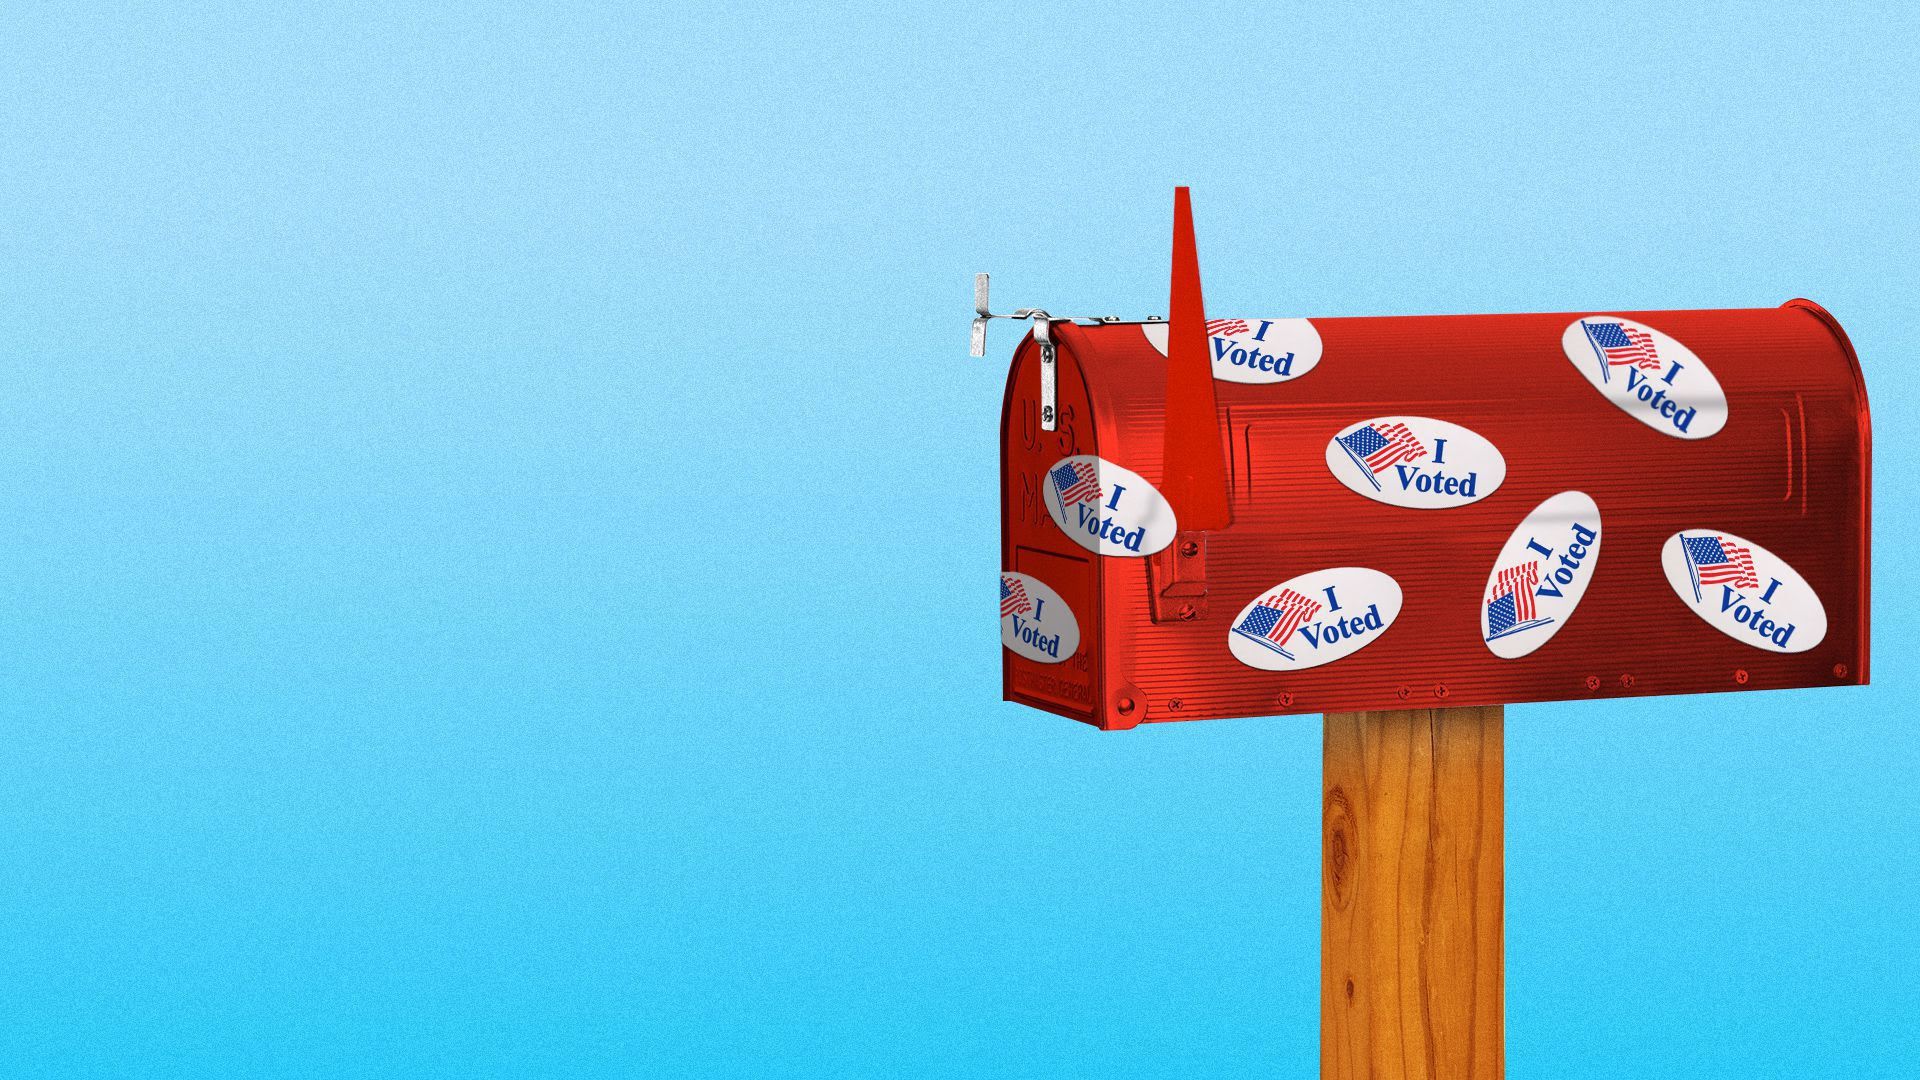 Illustration of a mail box covered in "I voted" stickers